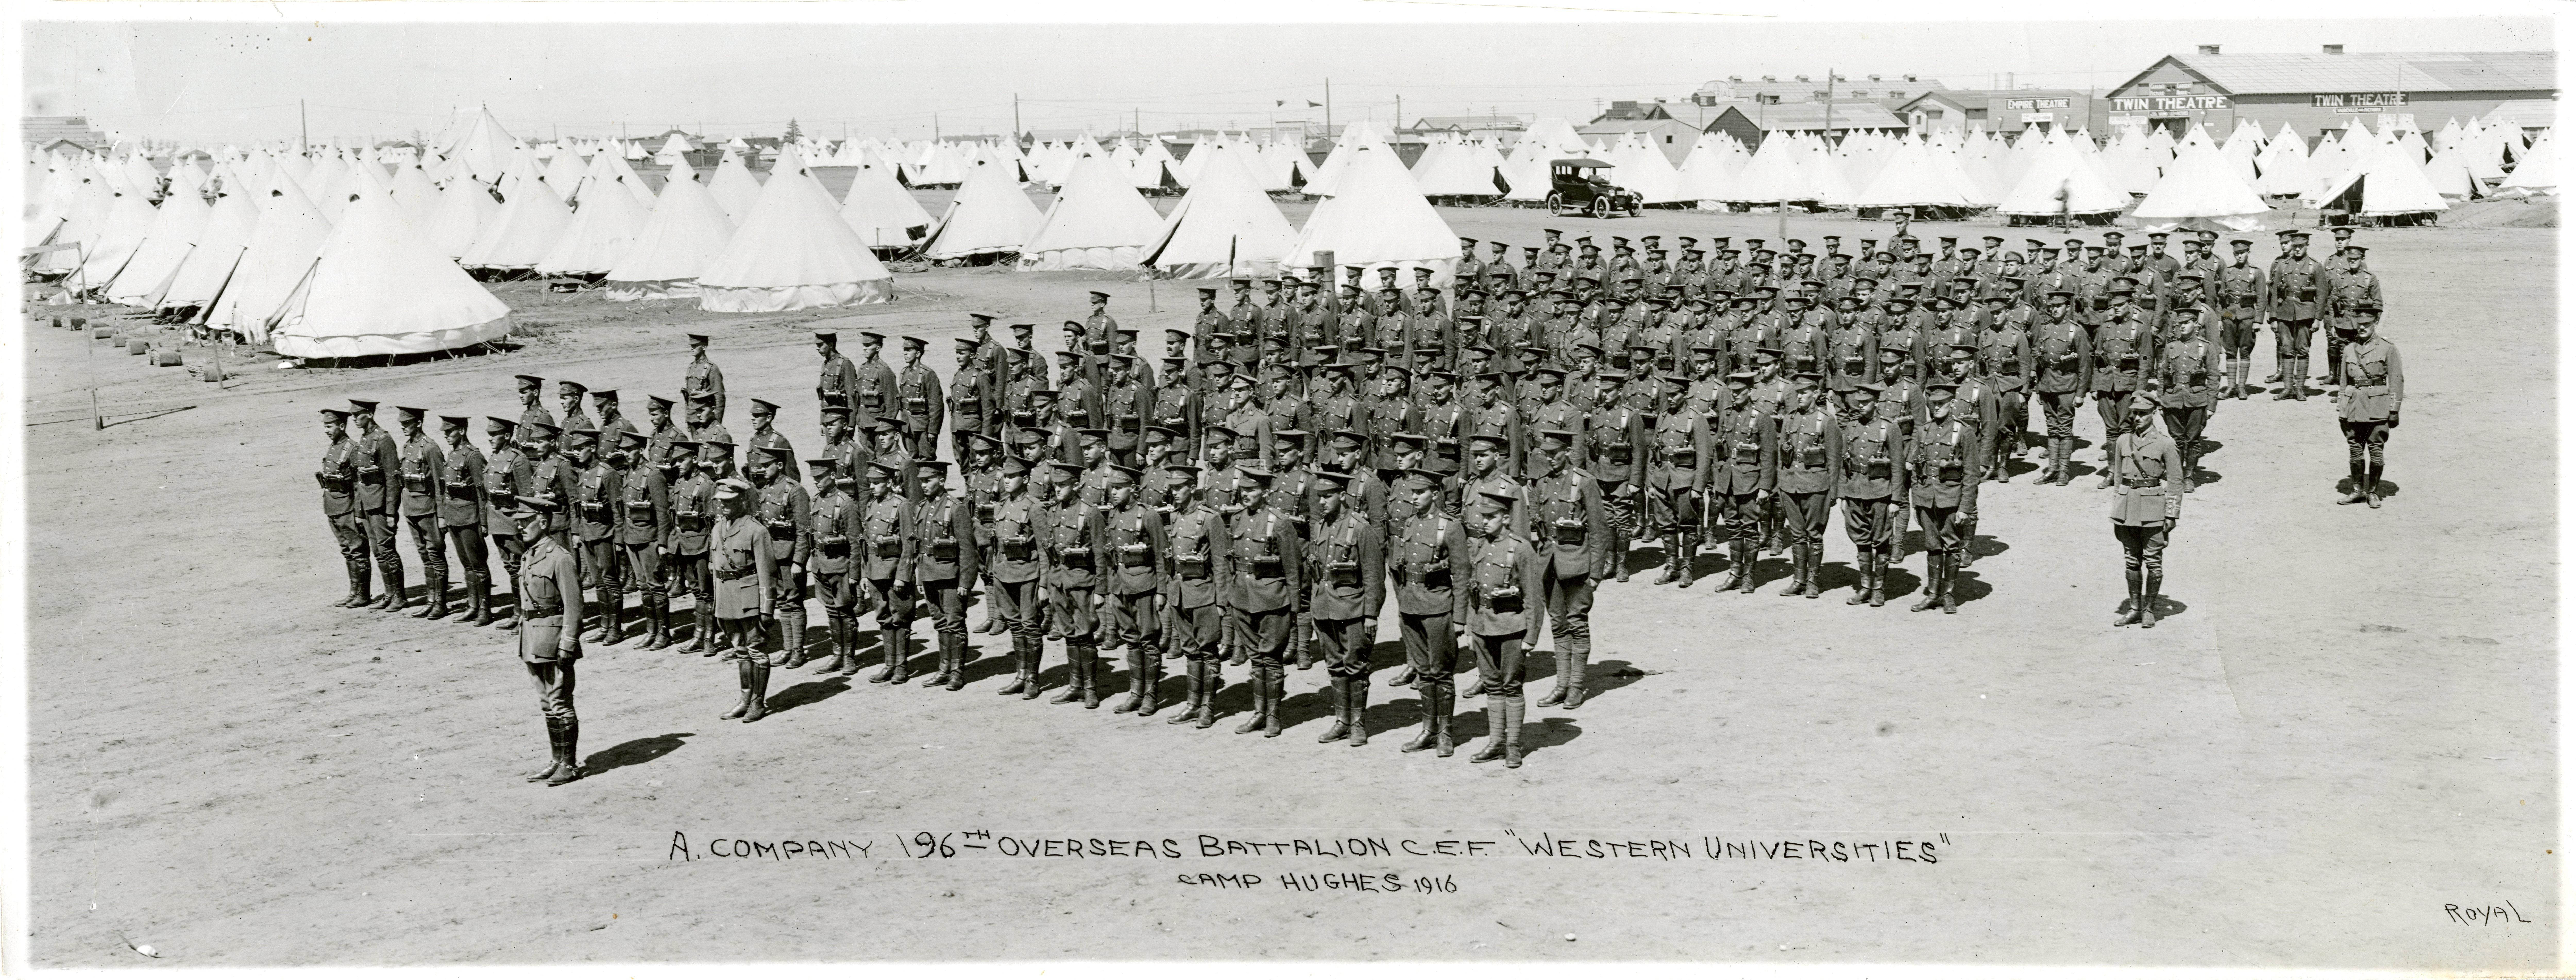 "A" Company, 196th Universities Battalion at Camp Hughes, Manitoba, 1916. Credit:  University of Manitoba Archives & Special Collections, Canadian Officers Training Corps fonds, PC 126 (A1991-035), Box 1.